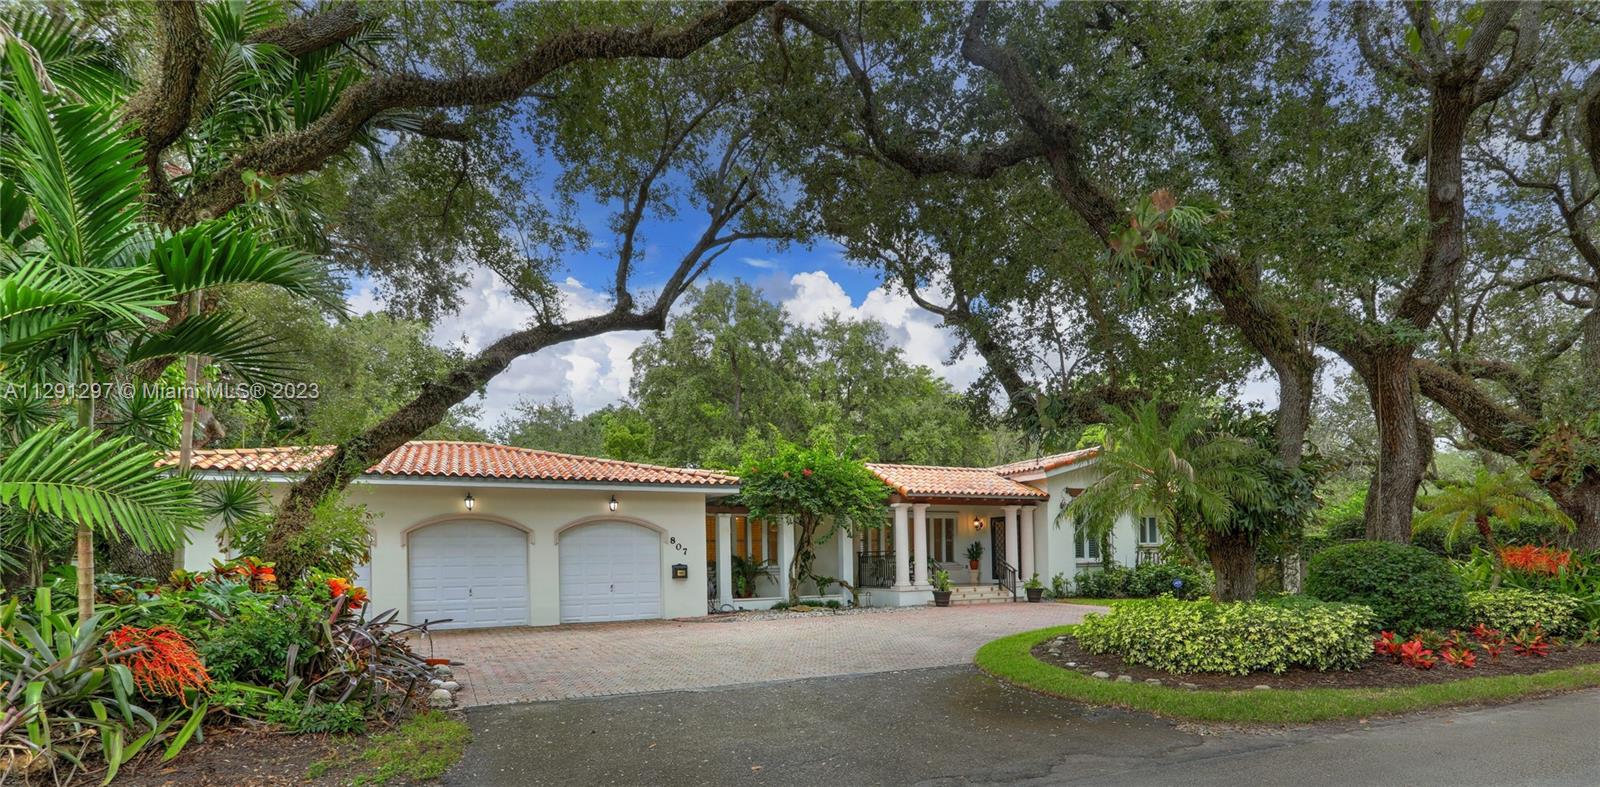 Located in the heart of Coral Gables, near Riviera Country Club, Merrick Park, & more, find this spacious 4,238 SF home on a magnificent 18,500 SF corner lot. The 4 BR, 3.5 BA, split plan home features gracious entertaining spaces including large formal living and dining rooms & wonderful family room that opens to the screened patio adjacent to the sparkling pool.  The vast kitchen features timeless & beautiful wood cabinetry, high-end appliances including a gas range & 2 ovens, & 2 eat-in areas.  The primary suite has 3 closets & a lovely bathroom w/ separate shower & tub w/ beautiful views of the lawn from windows on 2 sides.  Other features: 2+ car garage, laundry room, marble & wood floors, plantation shutters, & accordion & panel hurricane shutters.  Make this fabulous home your own!